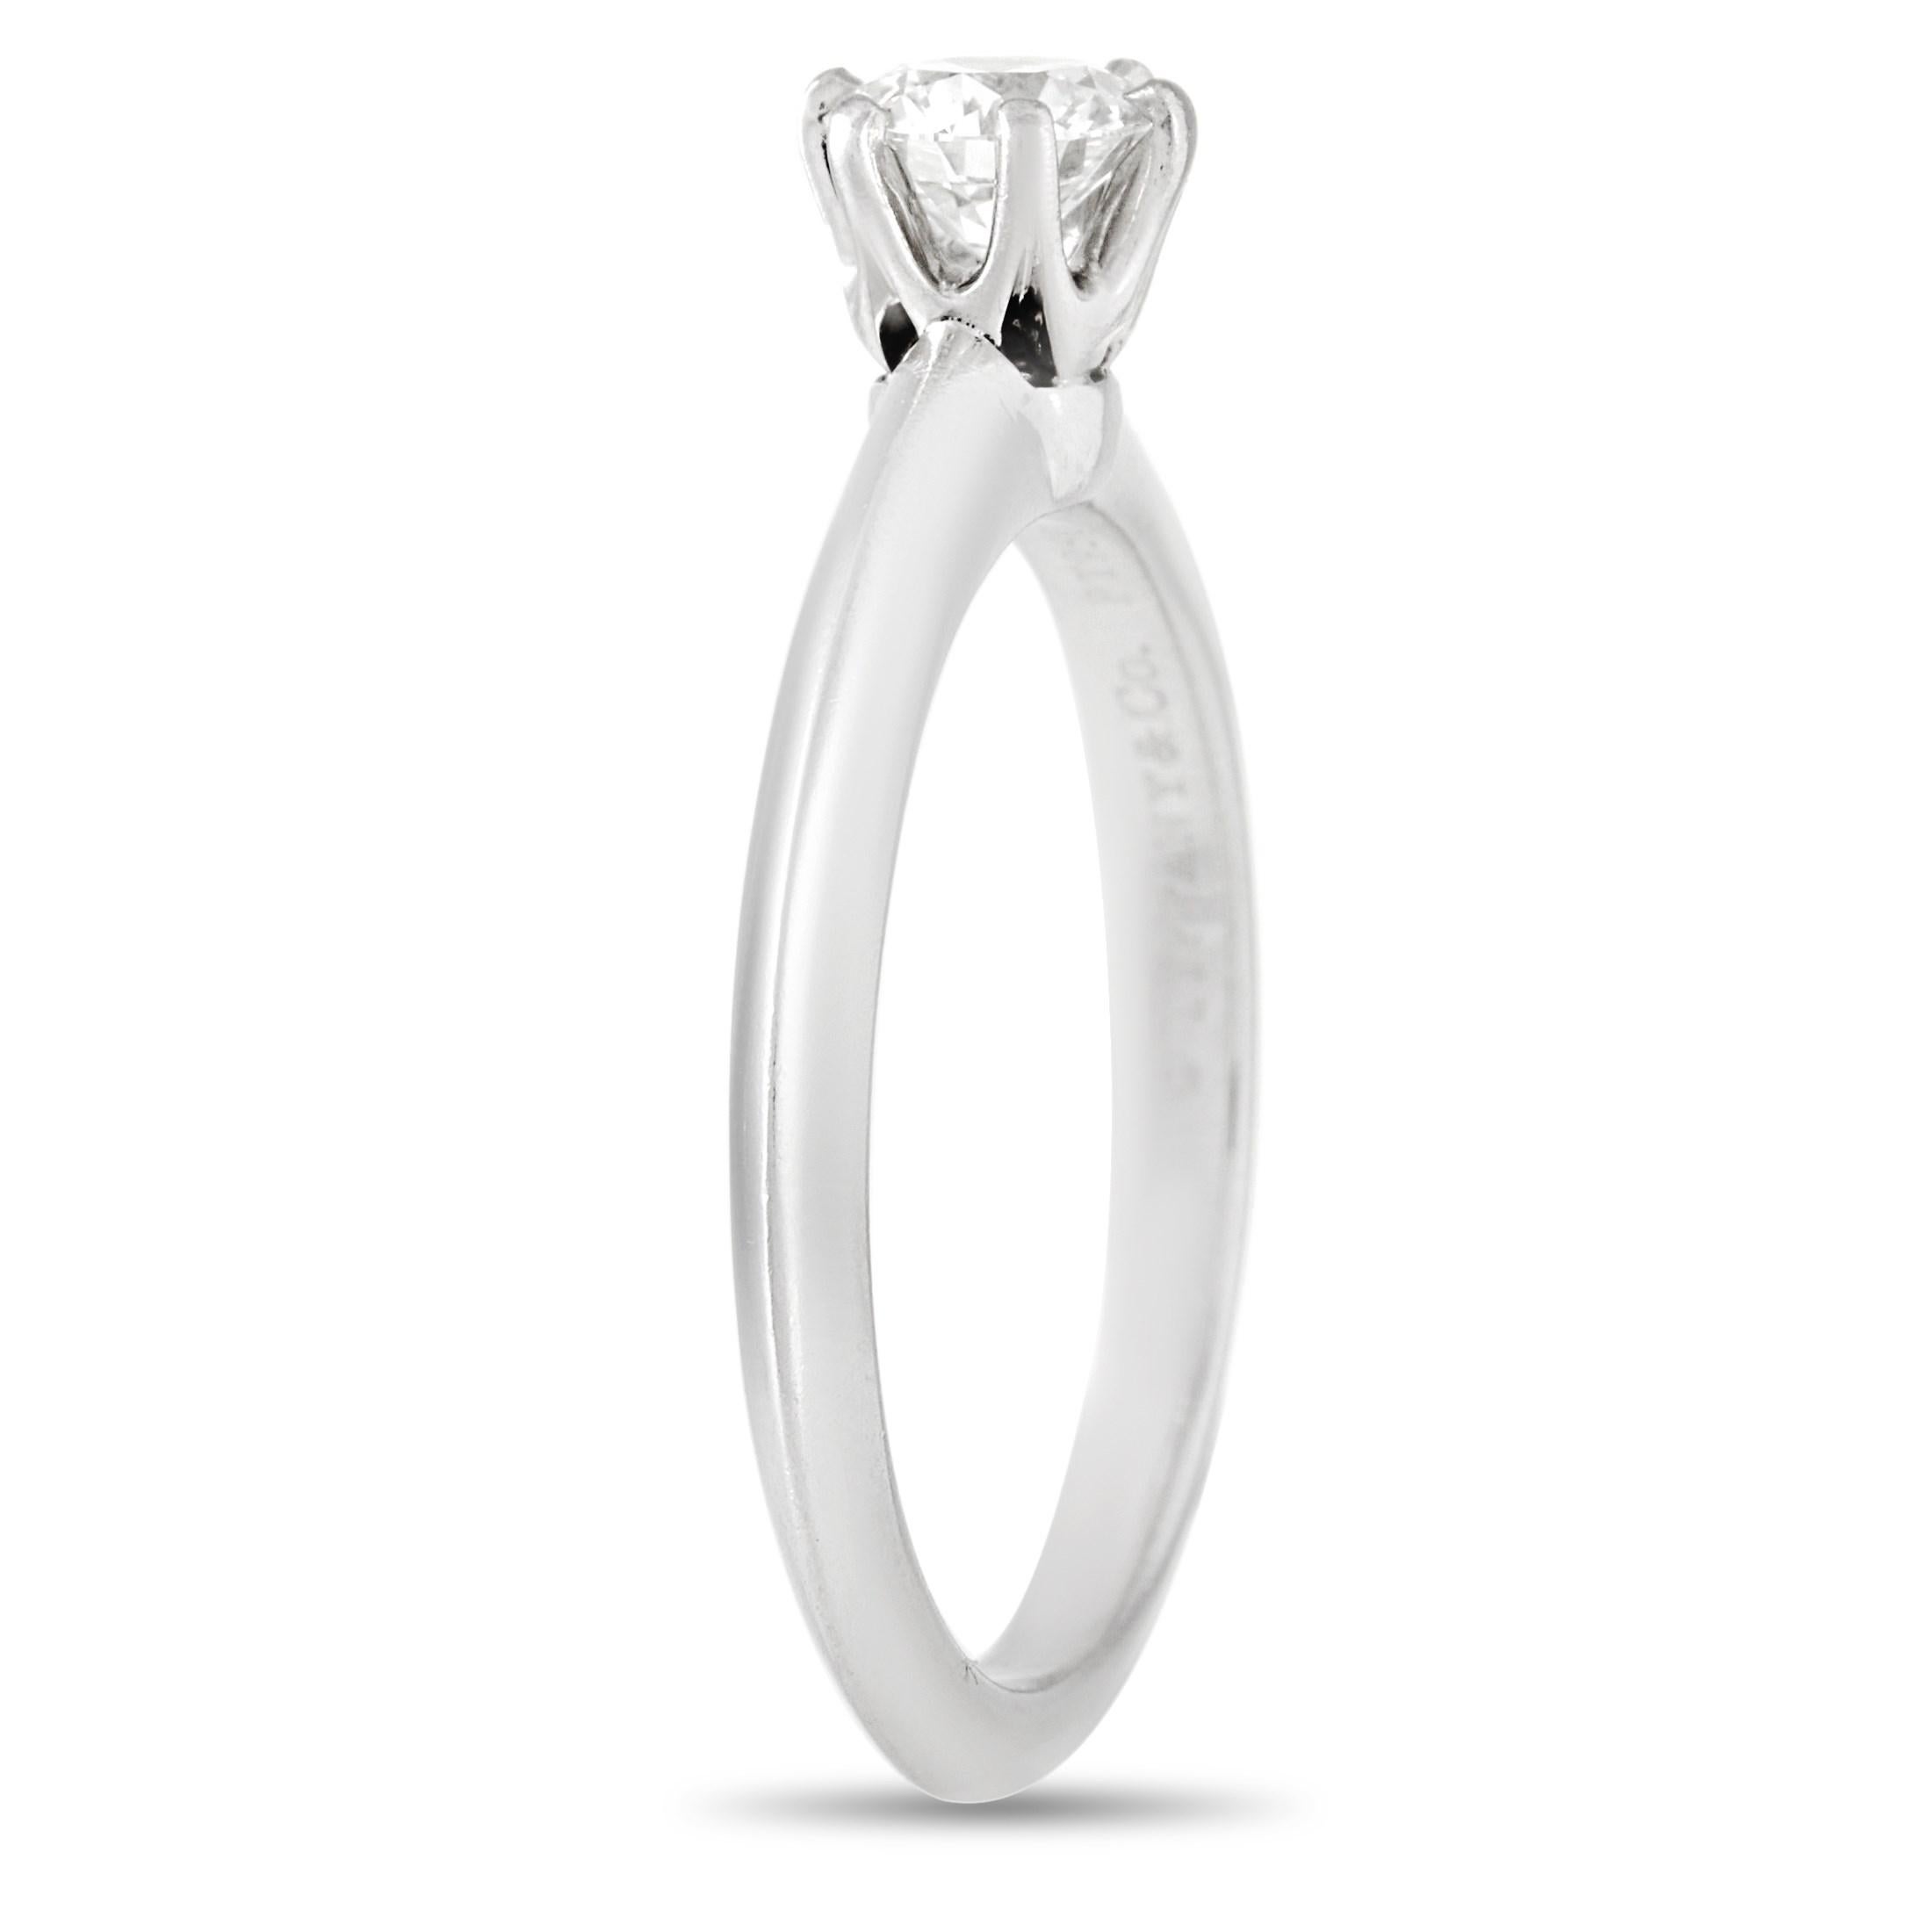 This classic Tiffany & Co. Platinum Solitaire 0.43 ct Diamond Engagement Ring is a timeless piece. The simple band is made with platinum and highlights a solitary 0.43 carat round-cut diamond of H color and VS2 clarity. The ring weighs a total of